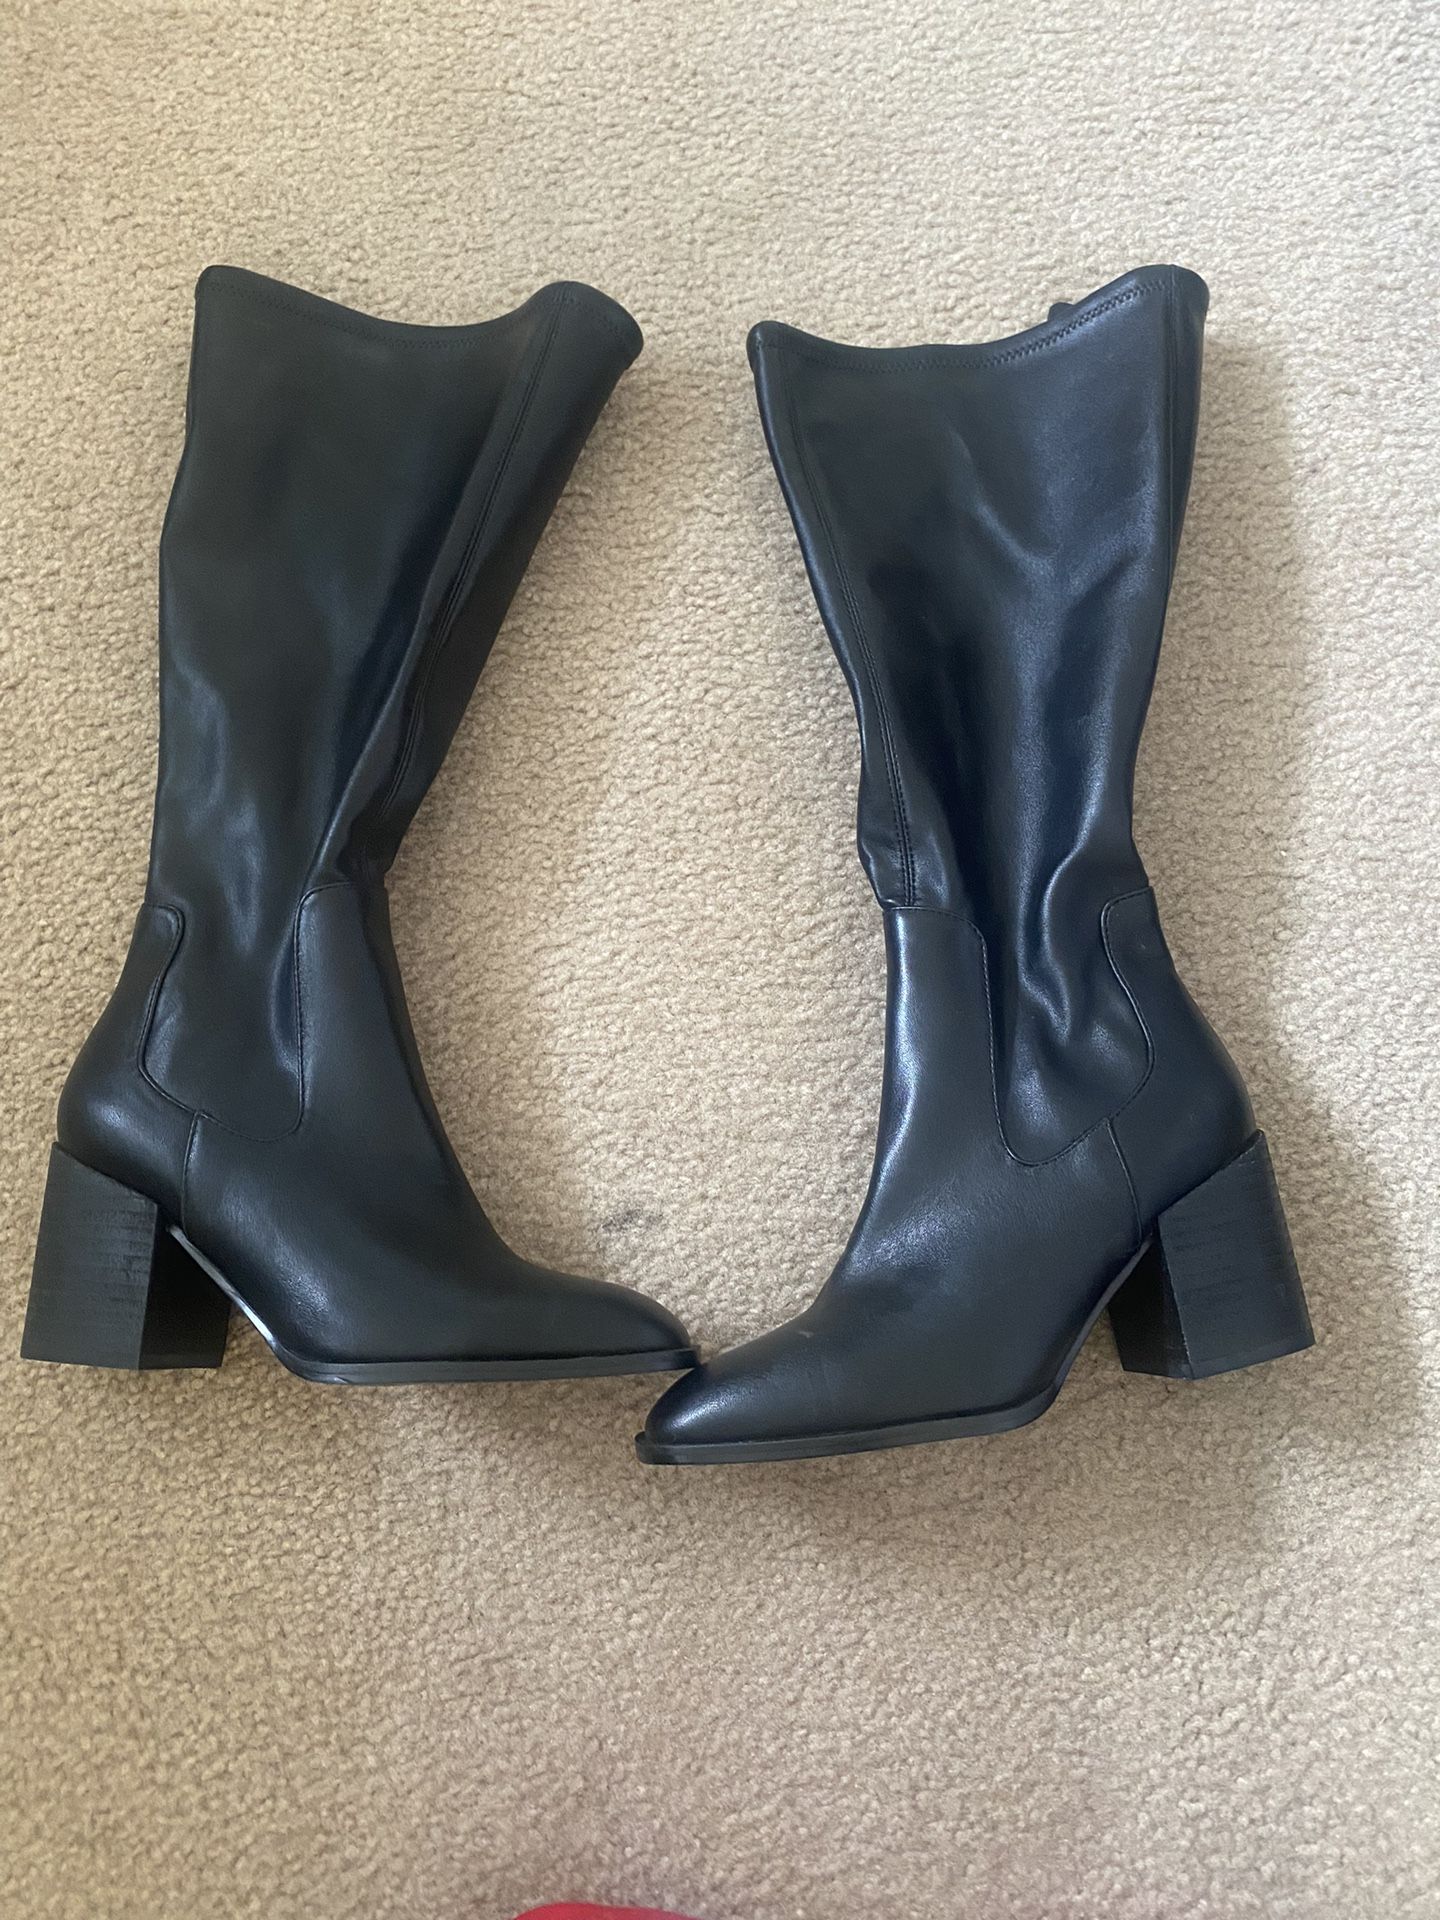 Vionic Leather Boots